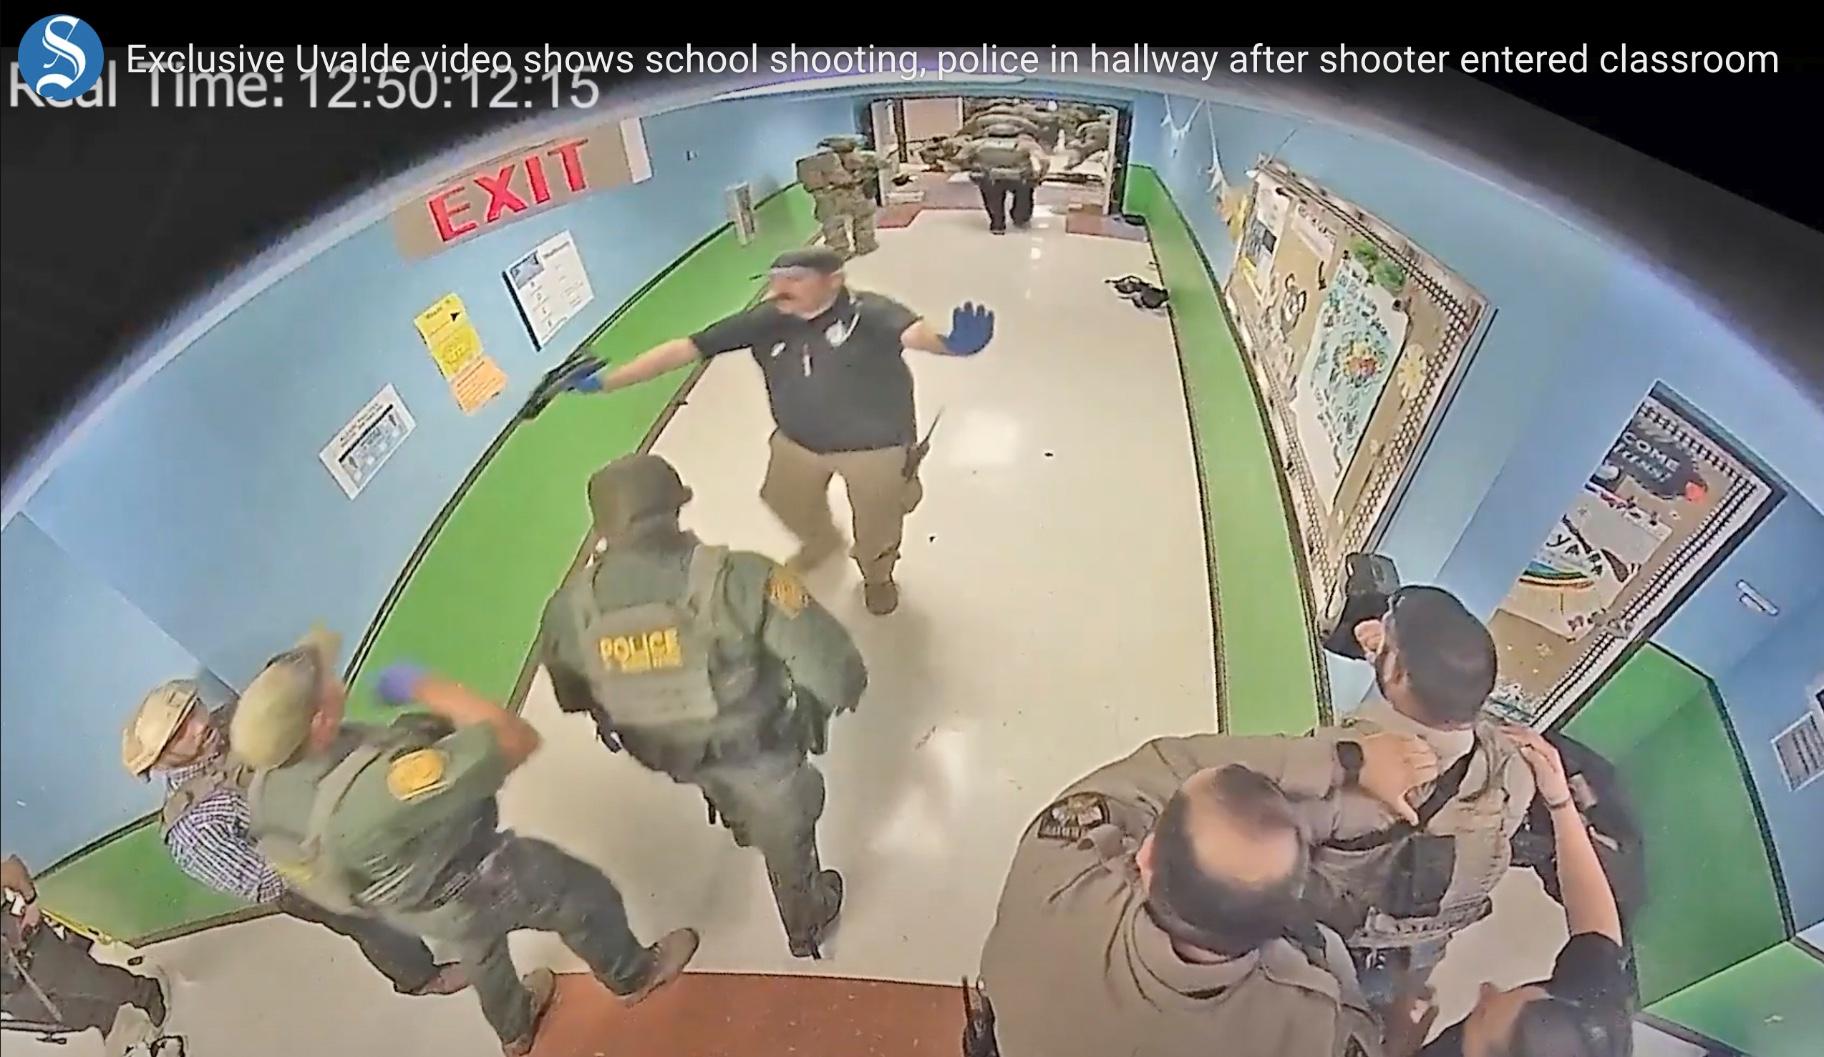 In this photo from surveillance video provided by the Uvalde Consolidated Independent School District via the Austin American-Statesman, authorities respond to the shooting at Robb Elementary School in Uvalde, Texas, on May 24, 2022. (Uvalde Consolidated Independent School District/Austin American-Statesman via AP, File)